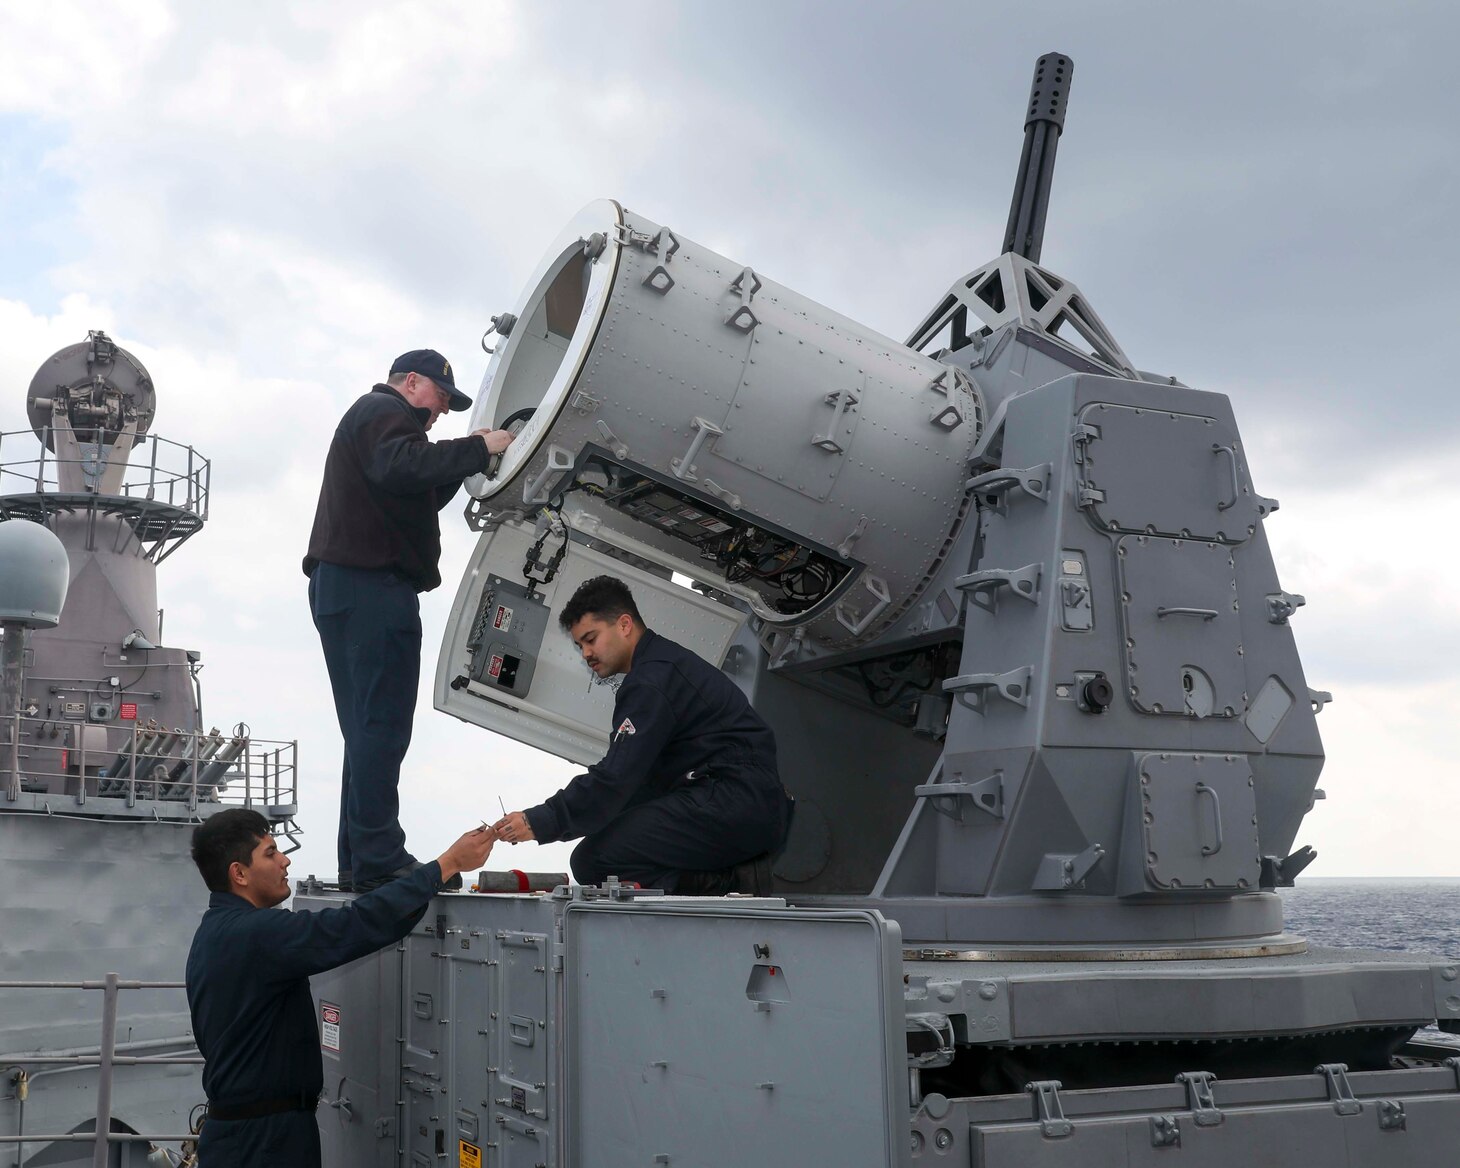 From left to right, Fire Controlman 2nd Class Francisco Morales, from Long Beach, California, Chief Fire Controlman Wayne Whalen, from San Diego, and Fire Controlman 2nd Class James Yates, from Rome, New York, work on the Phalanx close-in weapons system (CIWS) aboard the Ticonderoga-class guided-missile cruiser USS Chancellorsville (CG 62) in the Philippine Sea, Jan. 20. Chancellorsville is assigned to Commander, Task Force 70/Carrier Strike Group 5 underway preforming routine operations in support of a free and open Indo-Pacific.